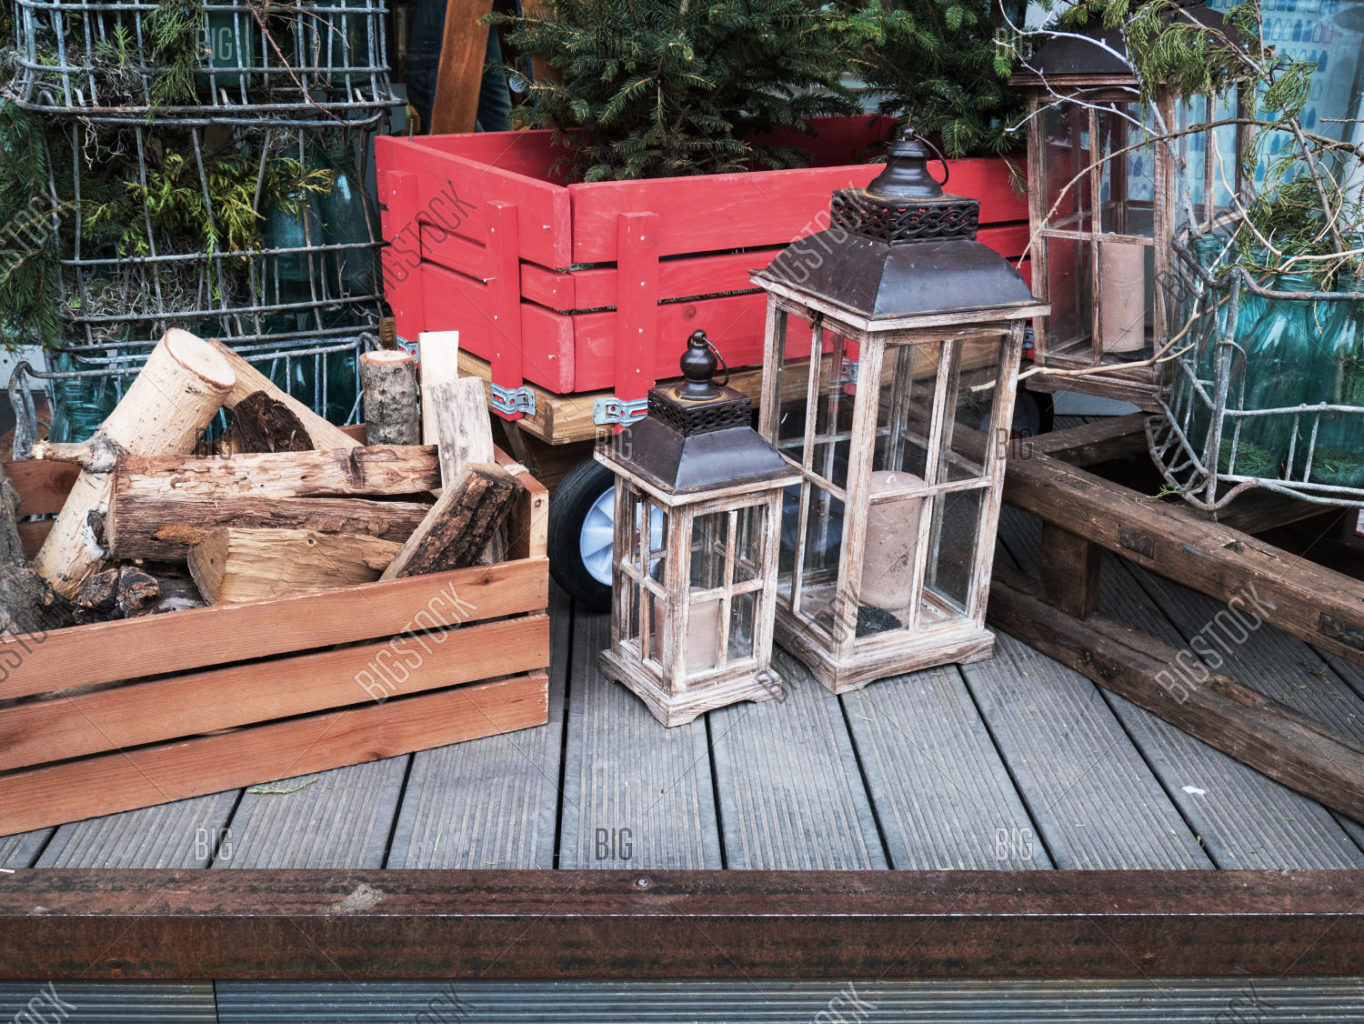 Check out these hidden gems you can get a flea markets.